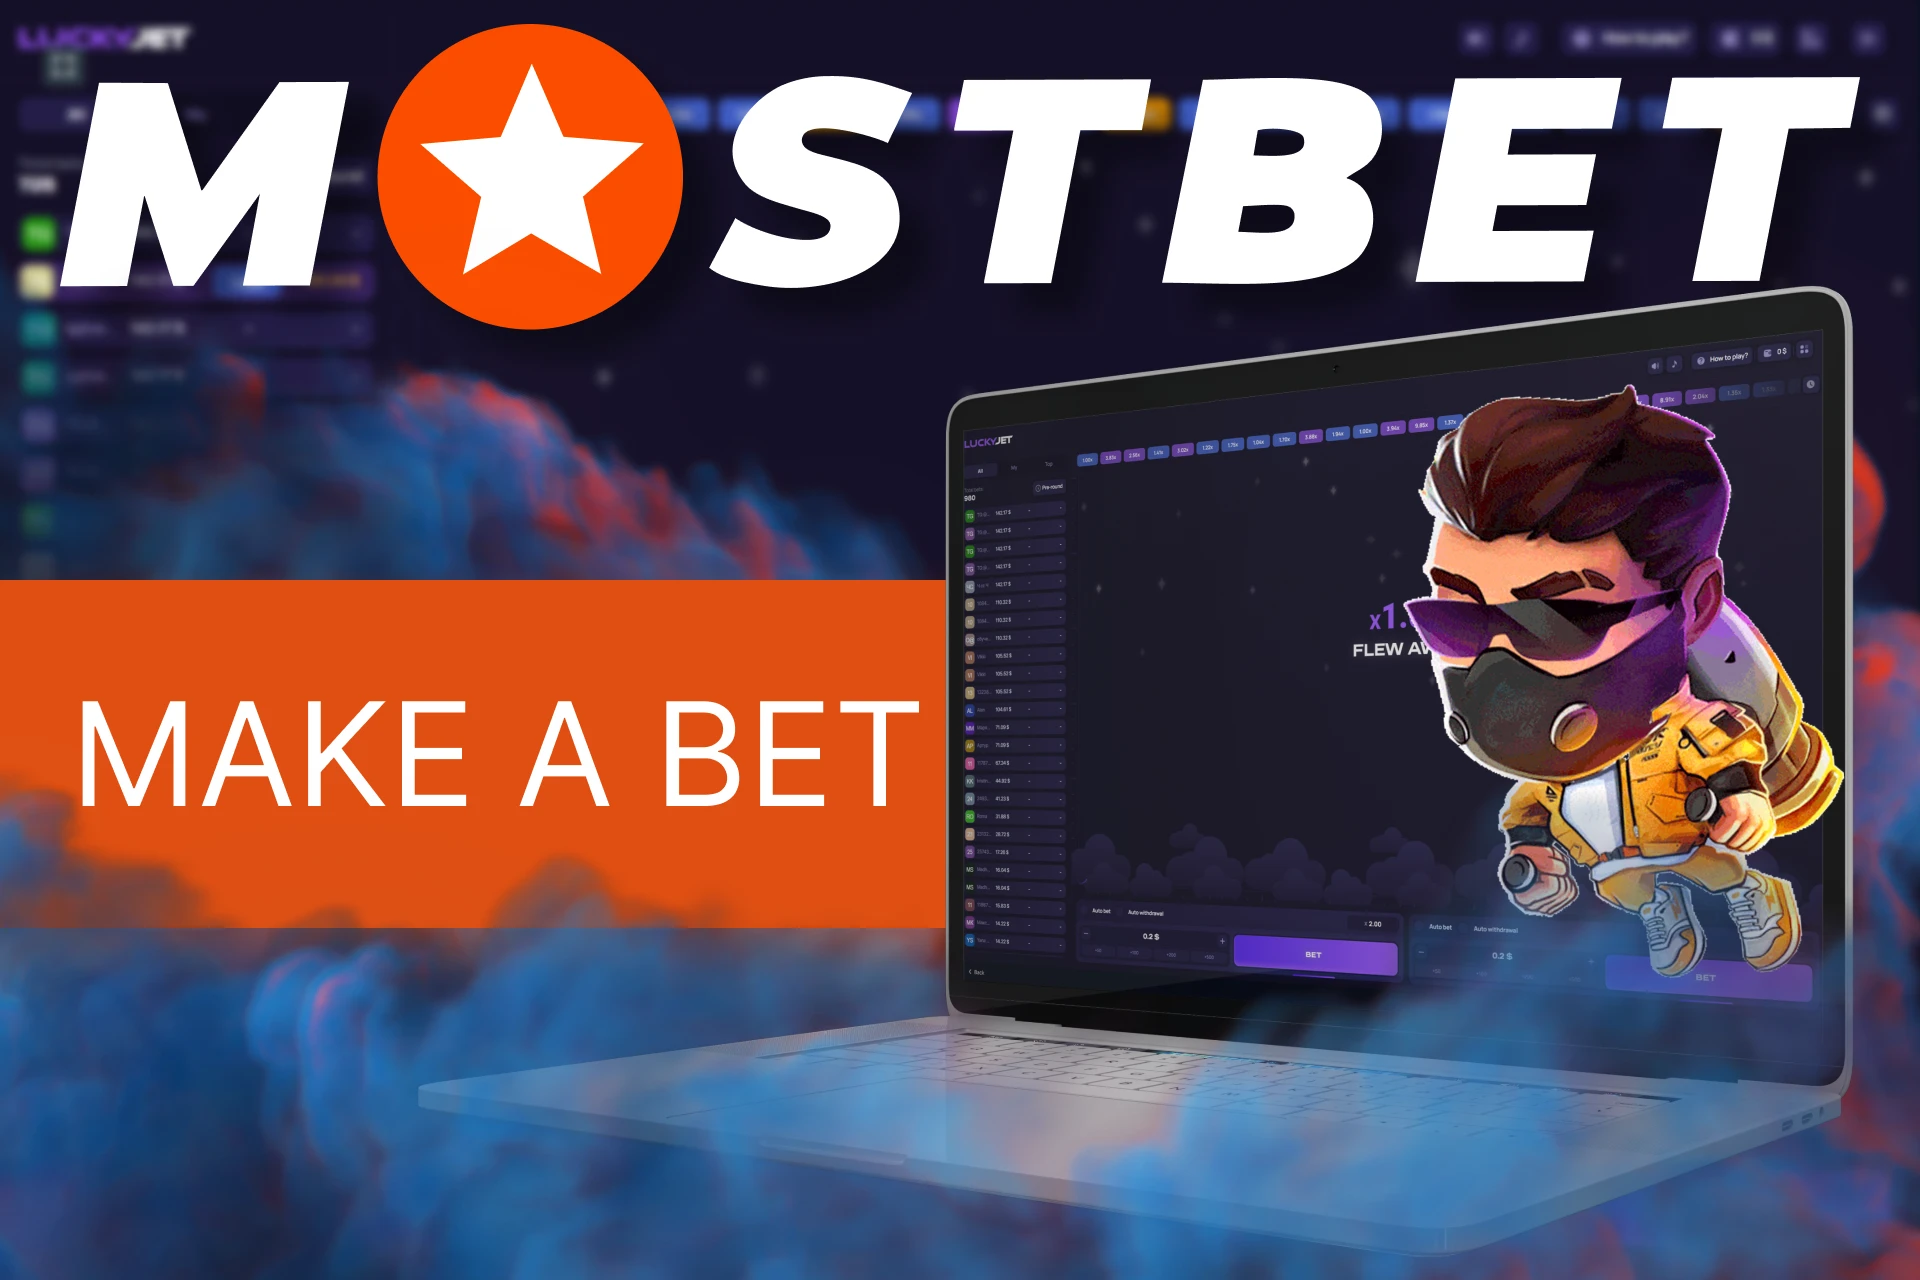 Play Lucky Jet on Mostbet, the best analogue of the Aviator game.